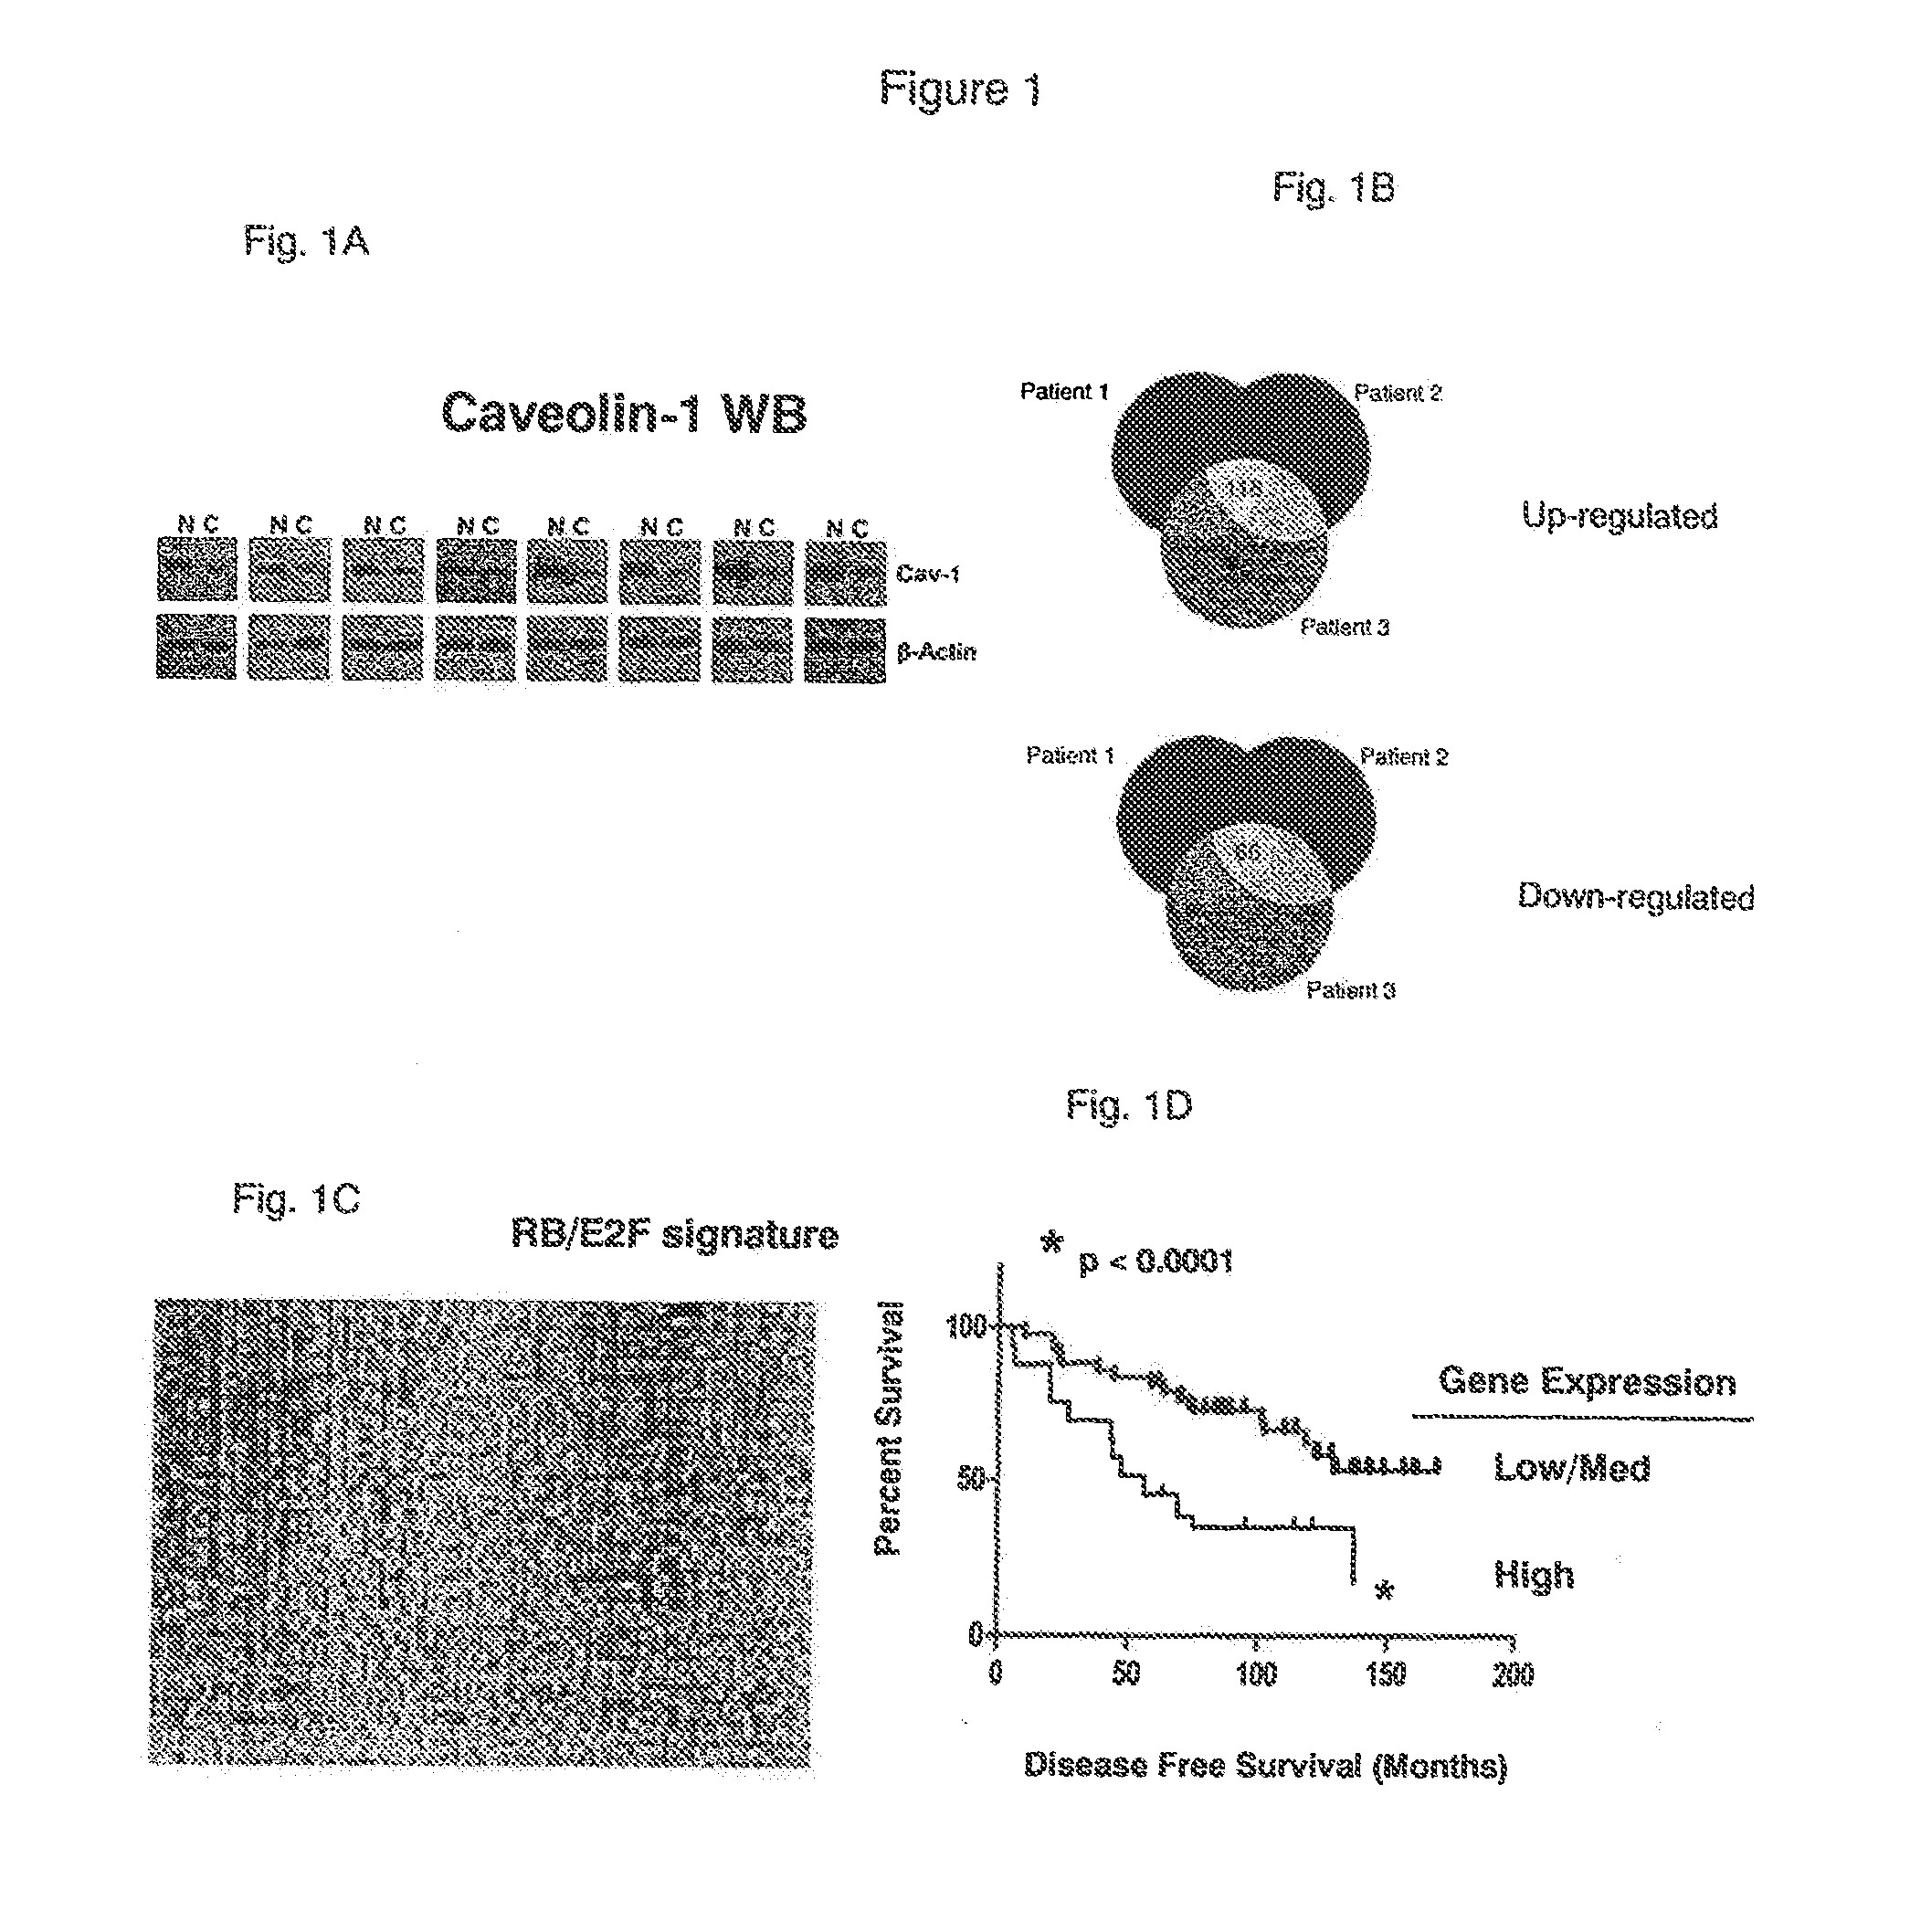 Therapeutics And Methods For Treating Neoplastic Diseases Comprising Determining The Level Of Caveolin-1 And/Or Caveolin-2 In A Stromal Cell Sample